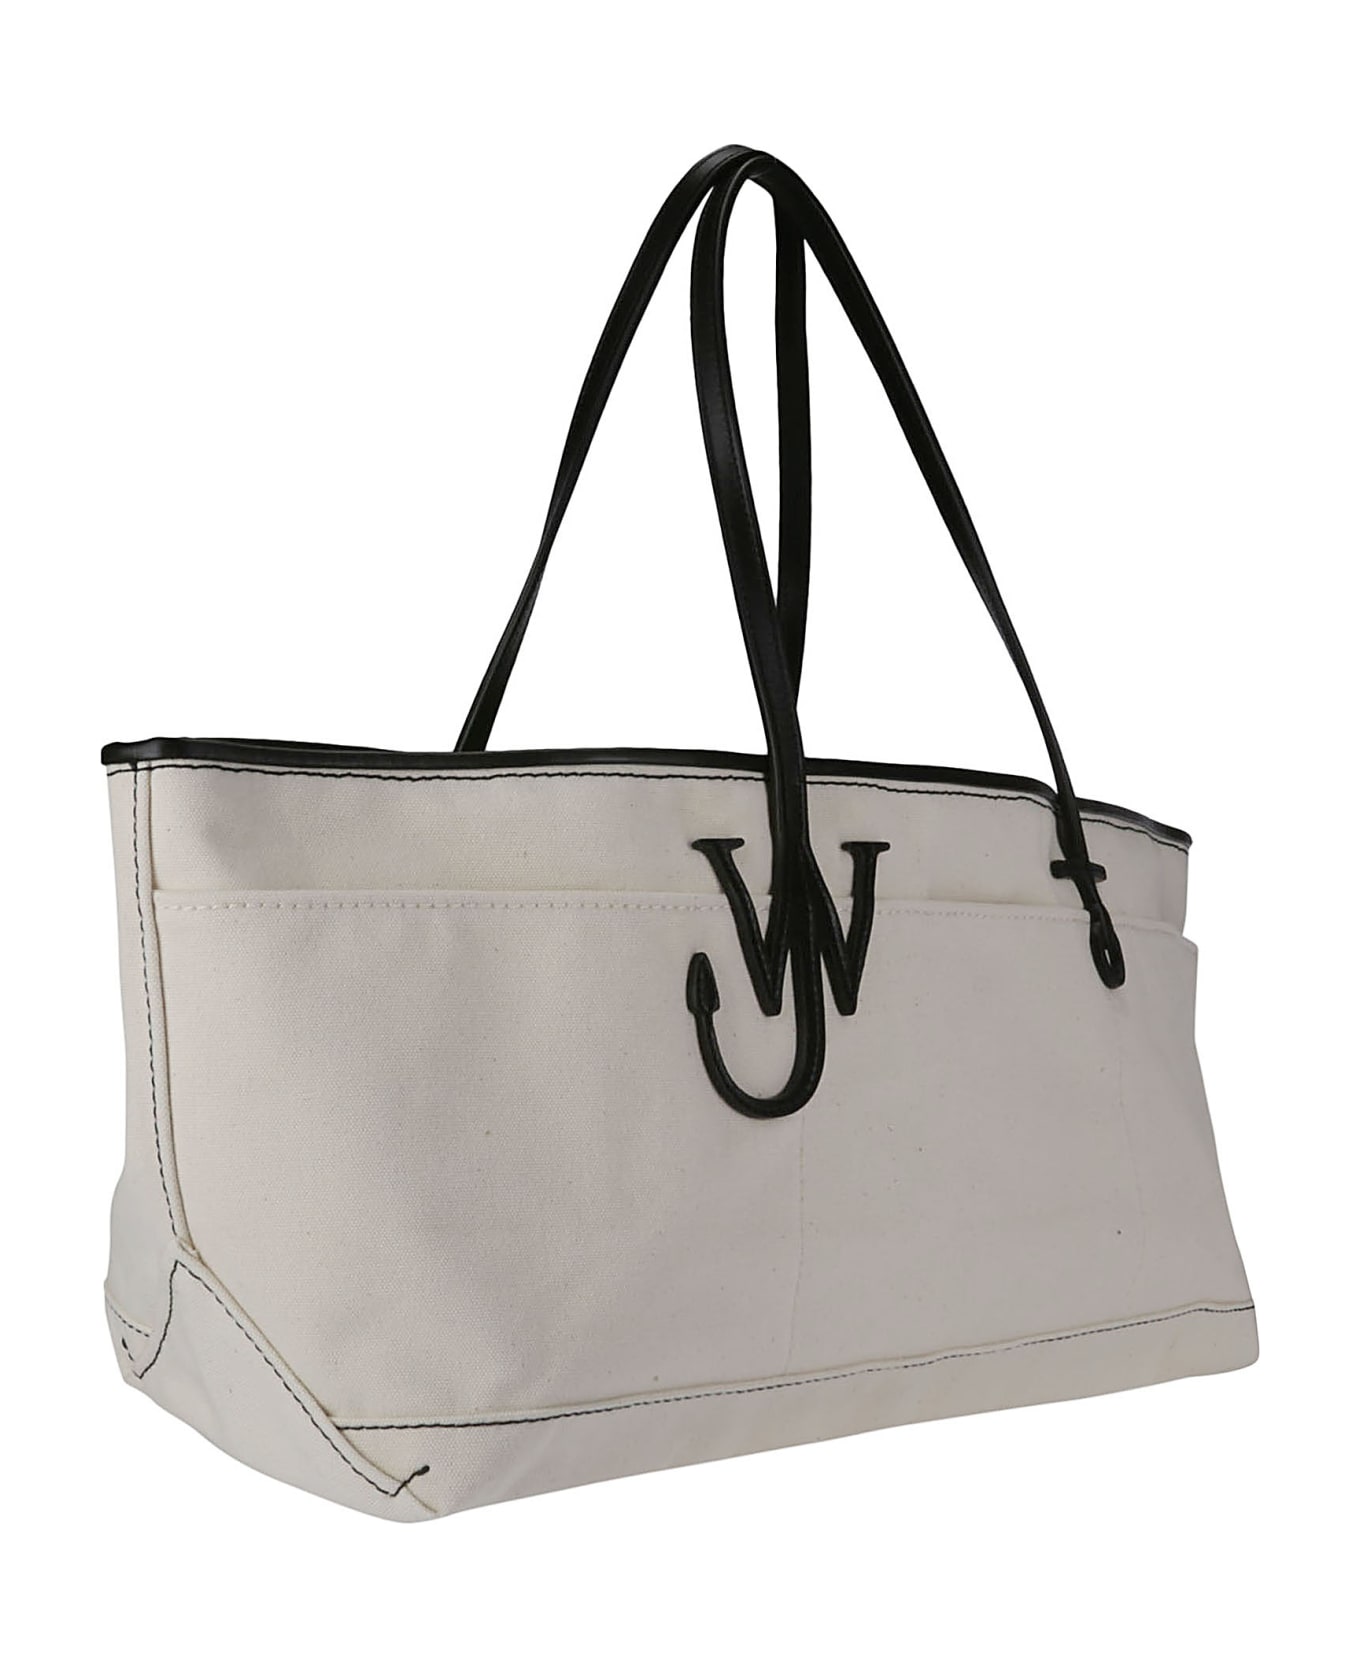 J.W. Anderson Anchor Stretch Tote - NATURAL/BLACK